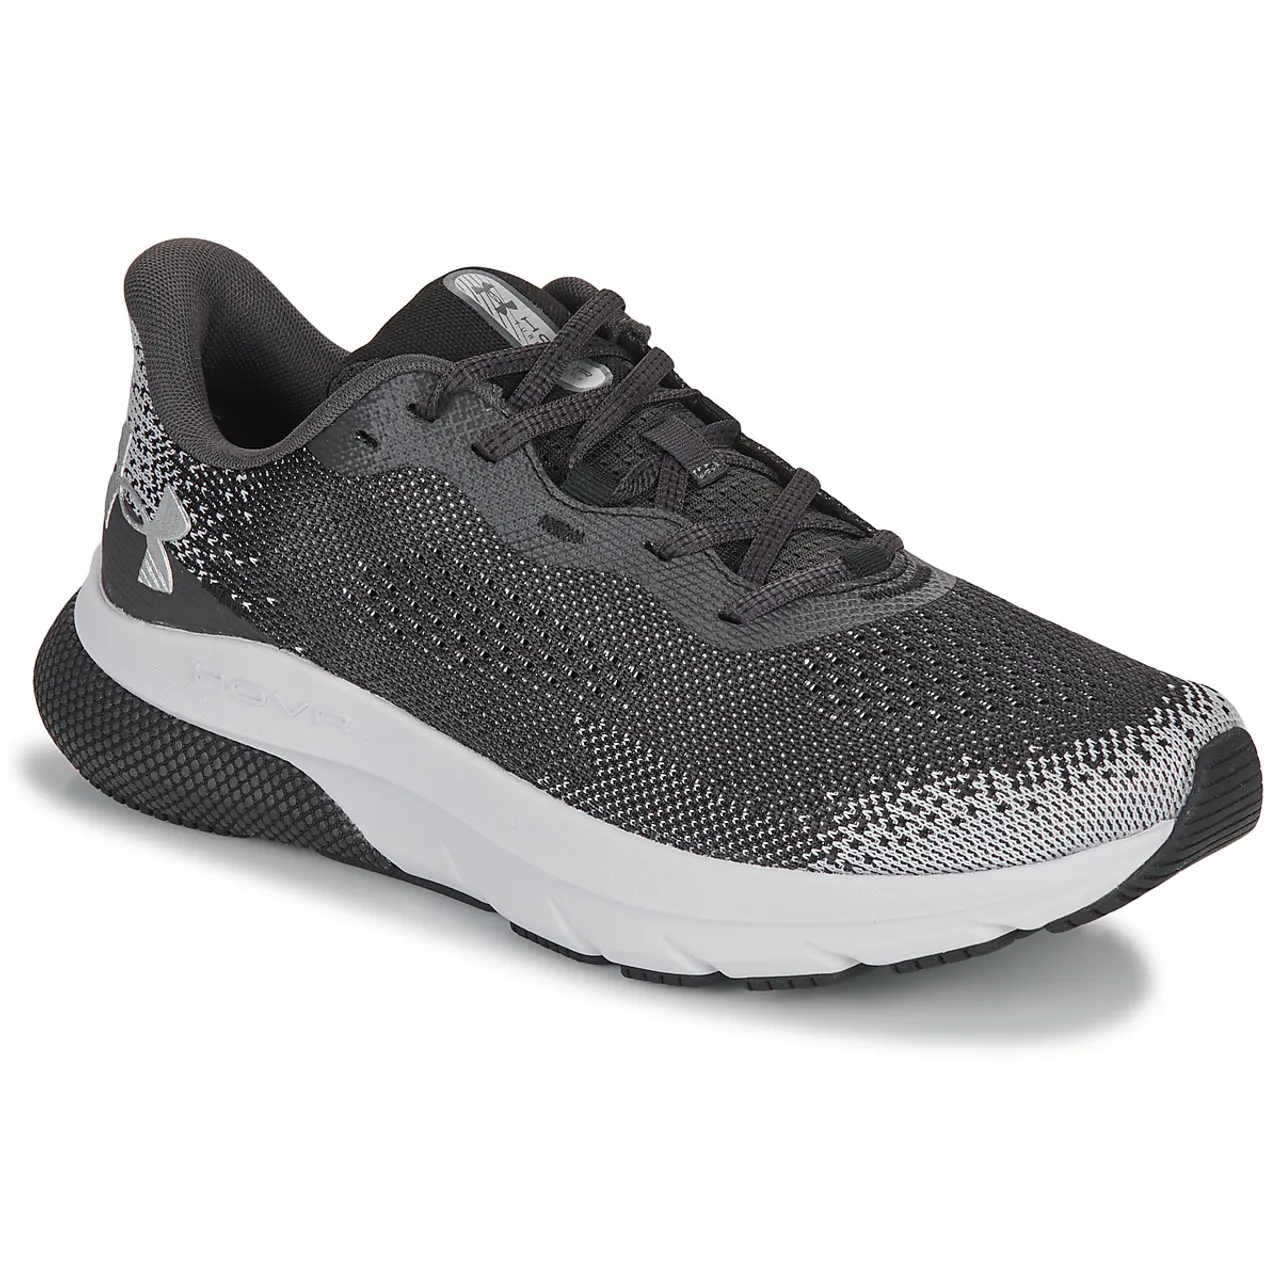 Under Armour  UA HOVR TURBULENCE 2  men's Running Trainers in Black